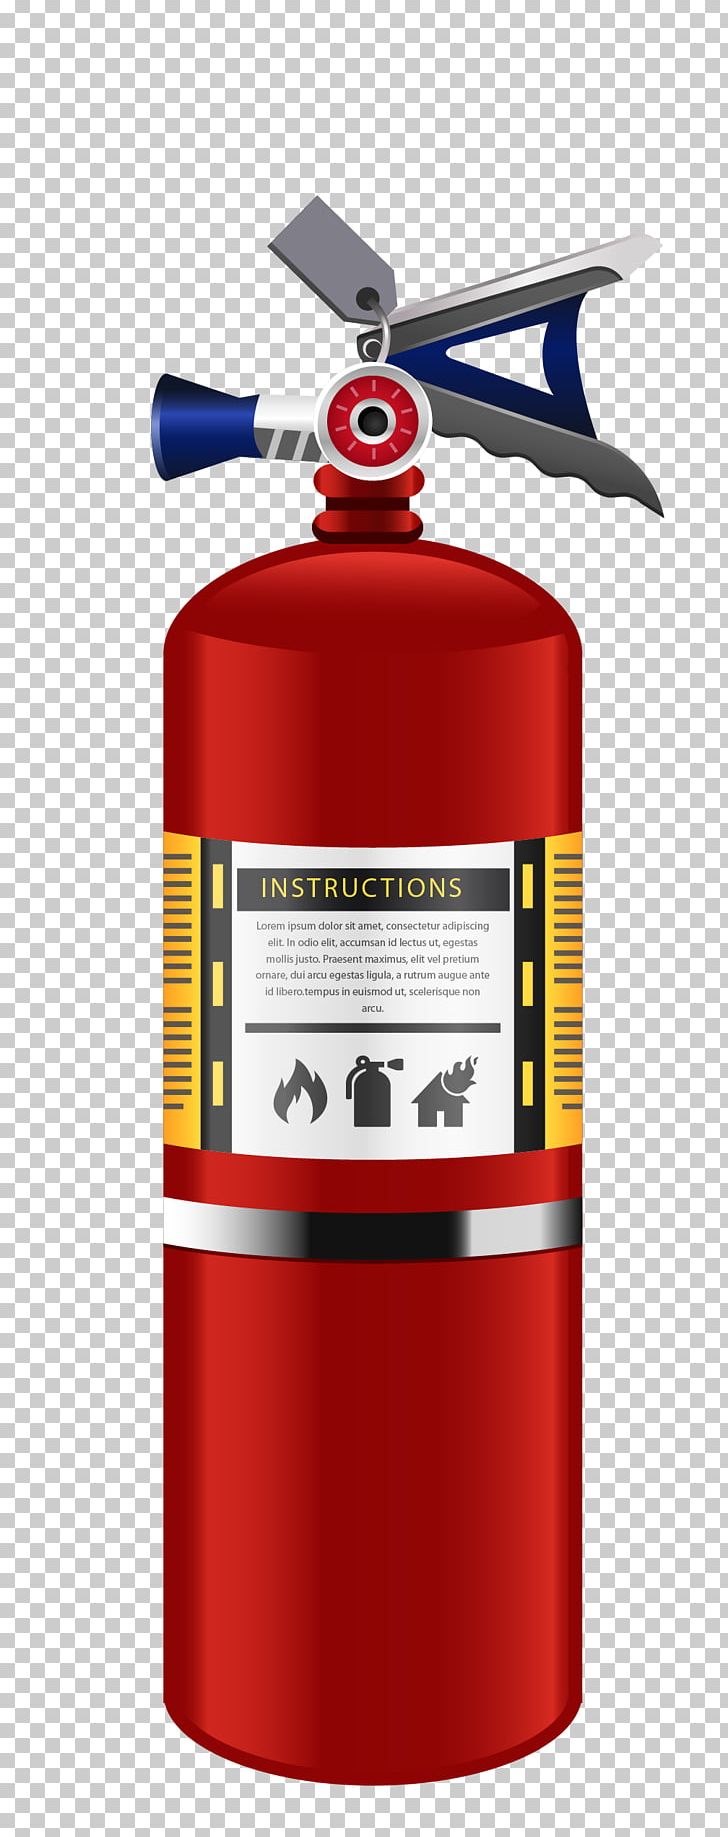 Fire Extinguisher Firefighting Foam PNG, Clipart, Encapsulated Postscript, Extinguisher, Fire Class, Fire Extinguisher Material, Happy Birthday Vector Images Free PNG Download